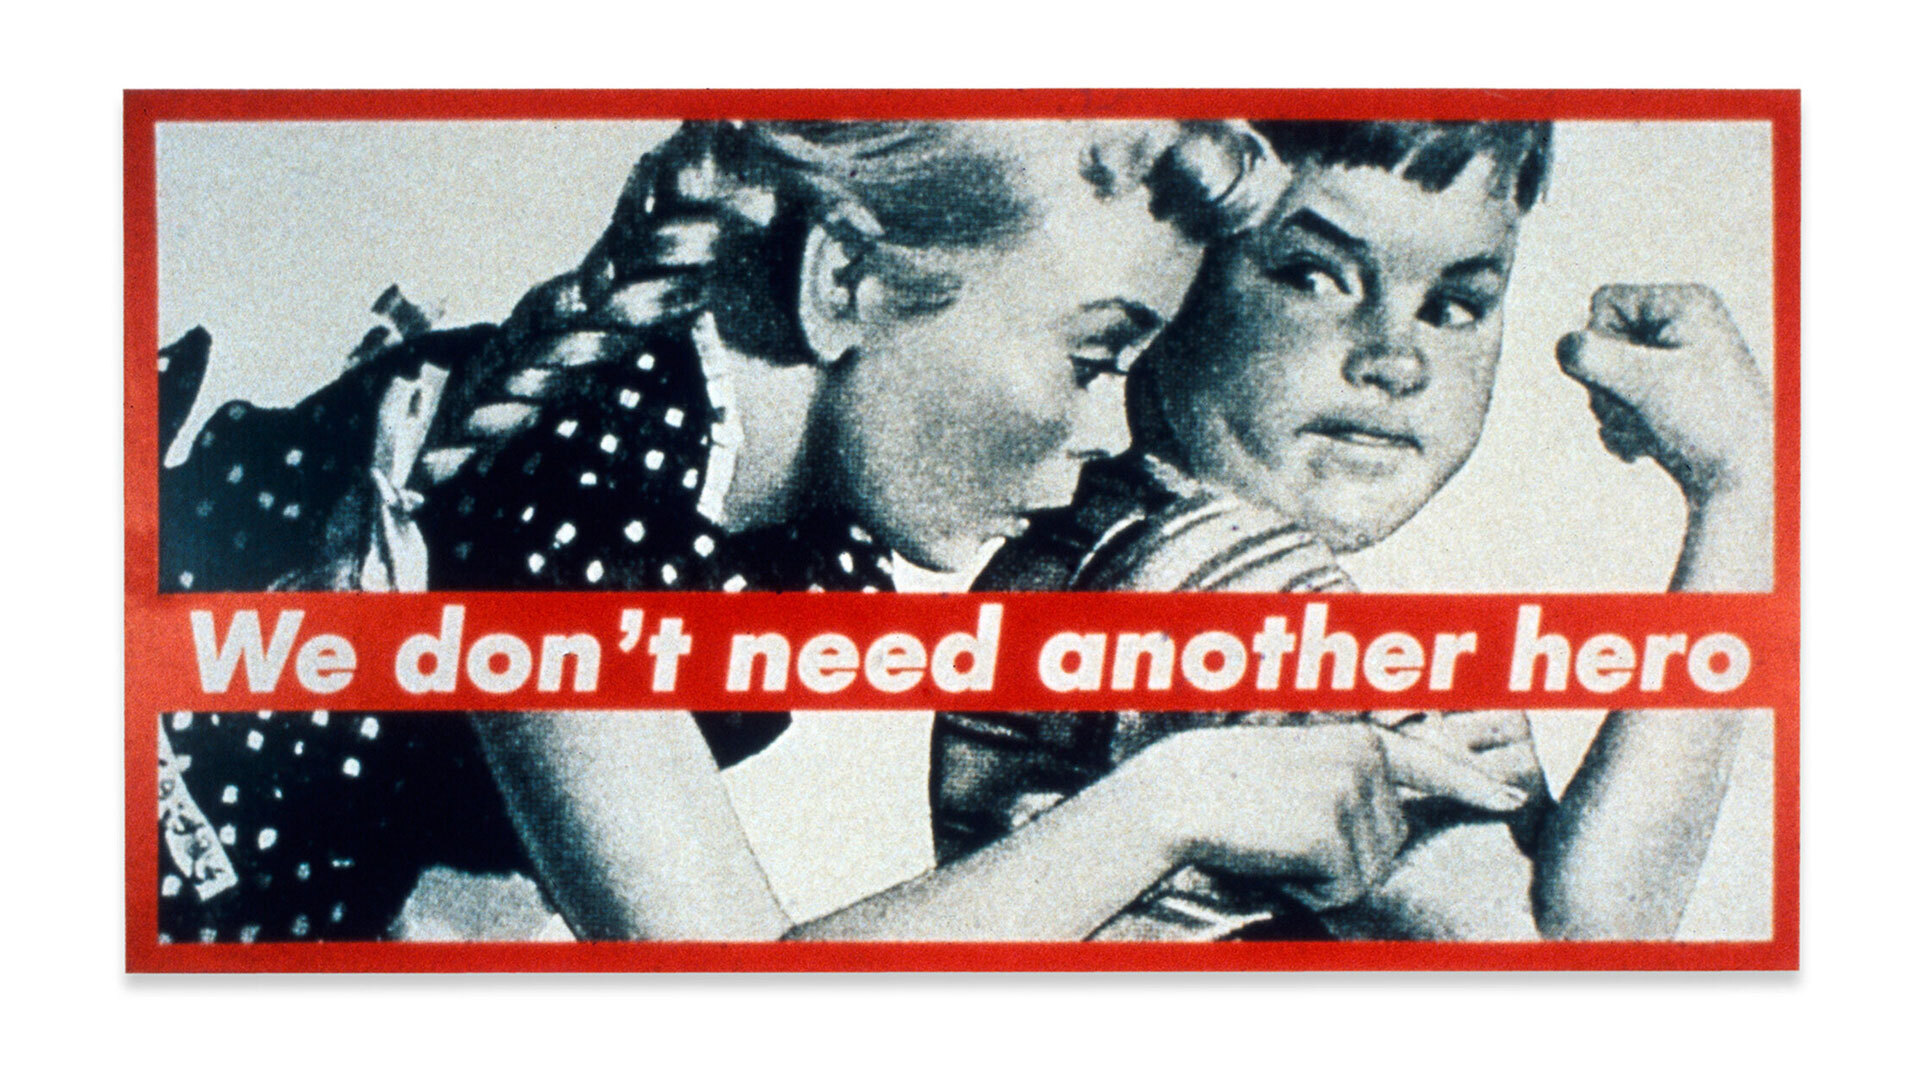 A work by Barbara Kruger, called “Untitled (We Don’t Need Another Hero)”, dated 1987.